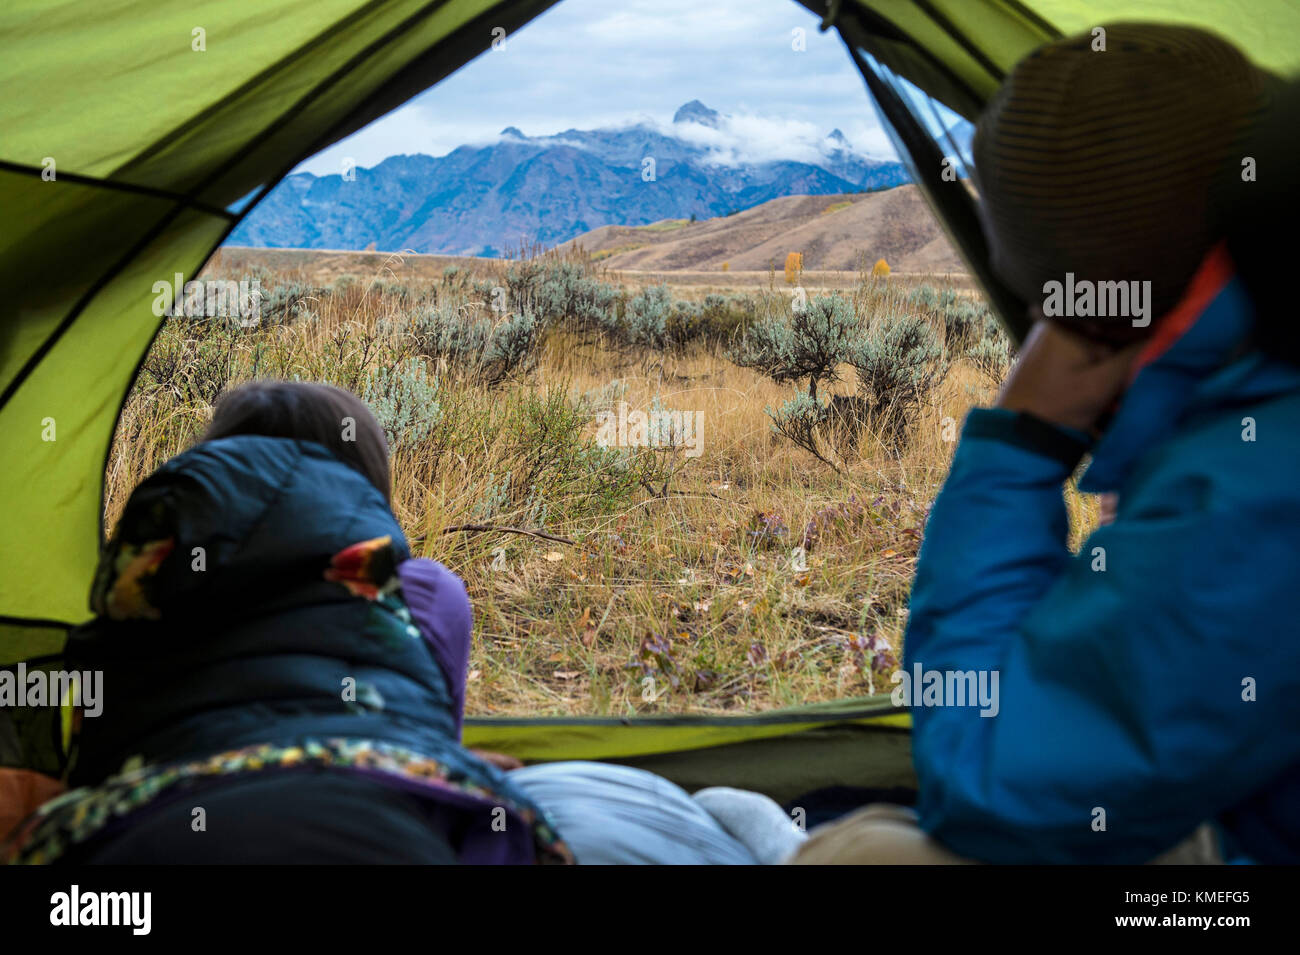 Camping couple looking at view of mountains outside tent,Jackson,Wyoming,USA Stock Photo